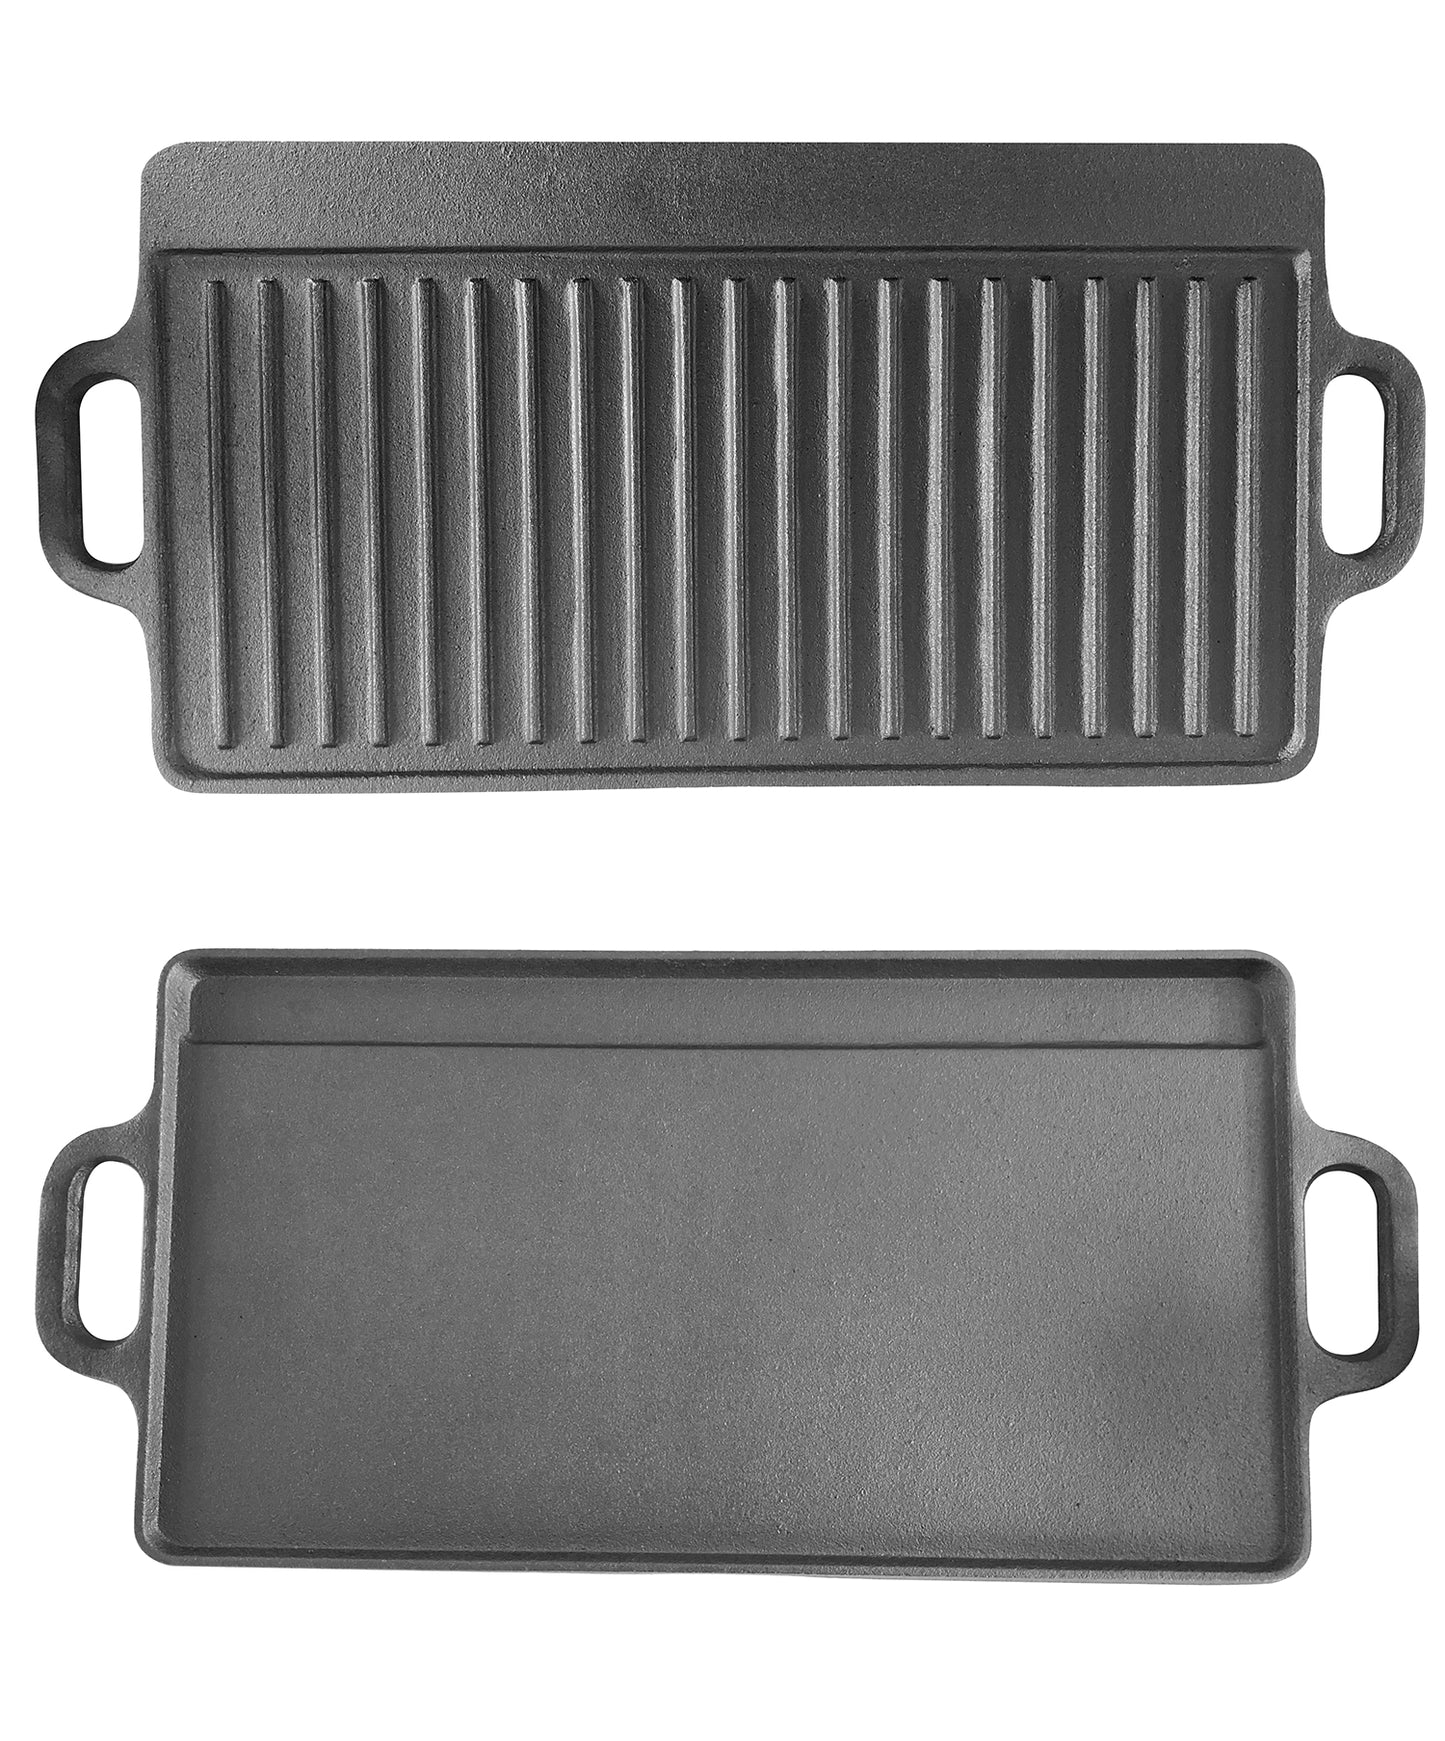 9.5 Inch Grill Pan with Lid Nonstick Square Griddle Pan